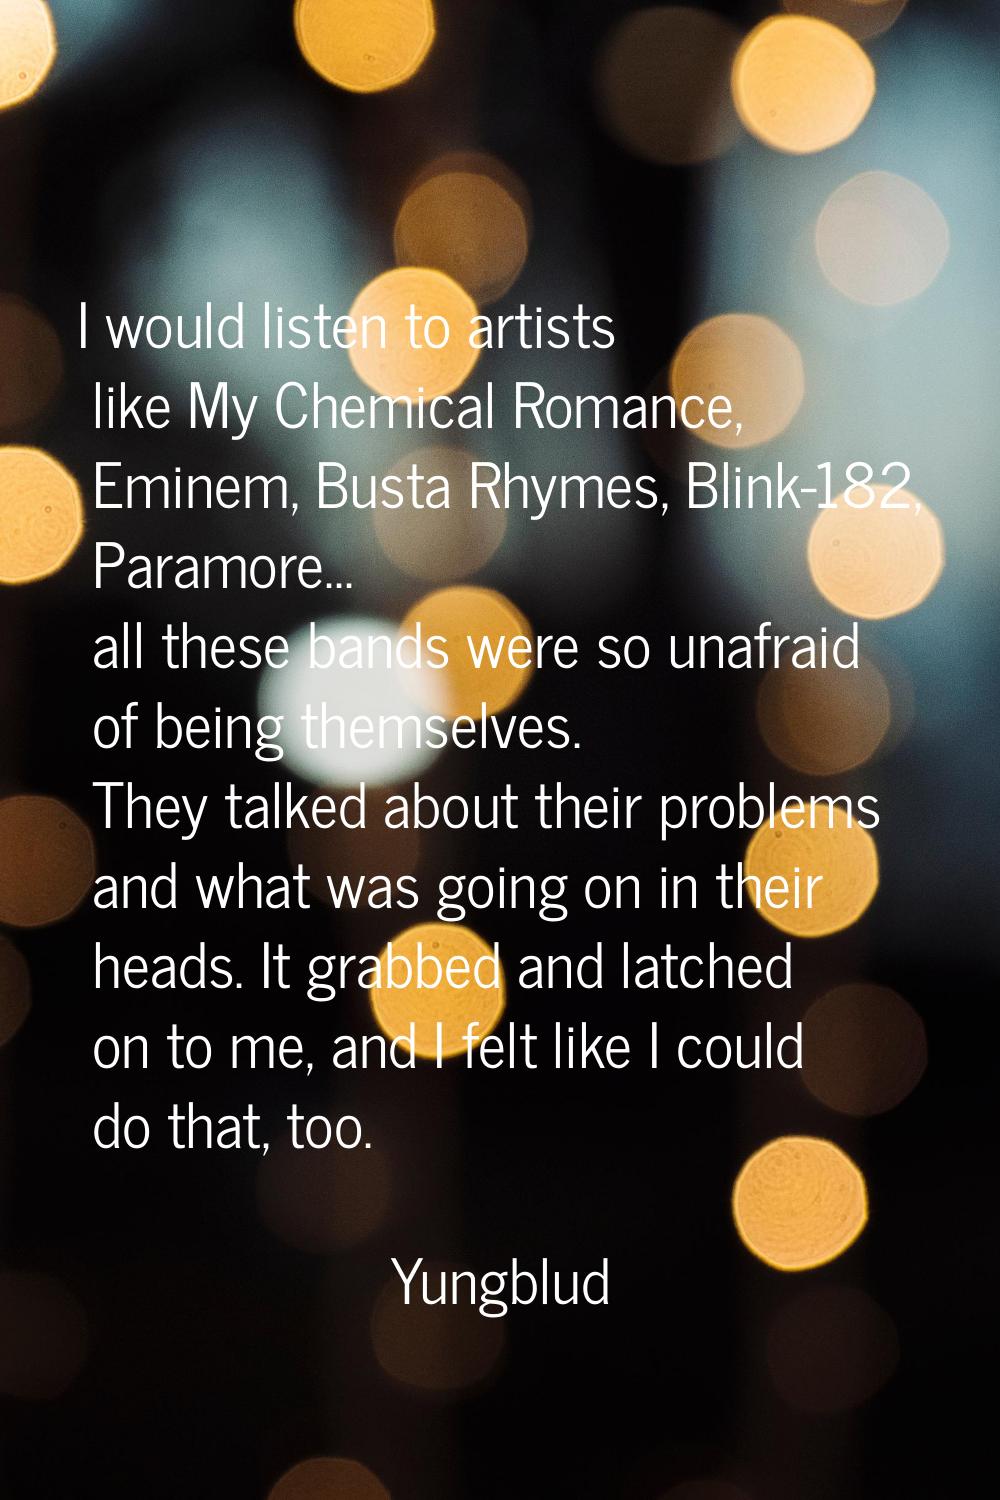 I would listen to artists like My Chemical Romance, Eminem, Busta Rhymes, Blink-182, Paramore... al